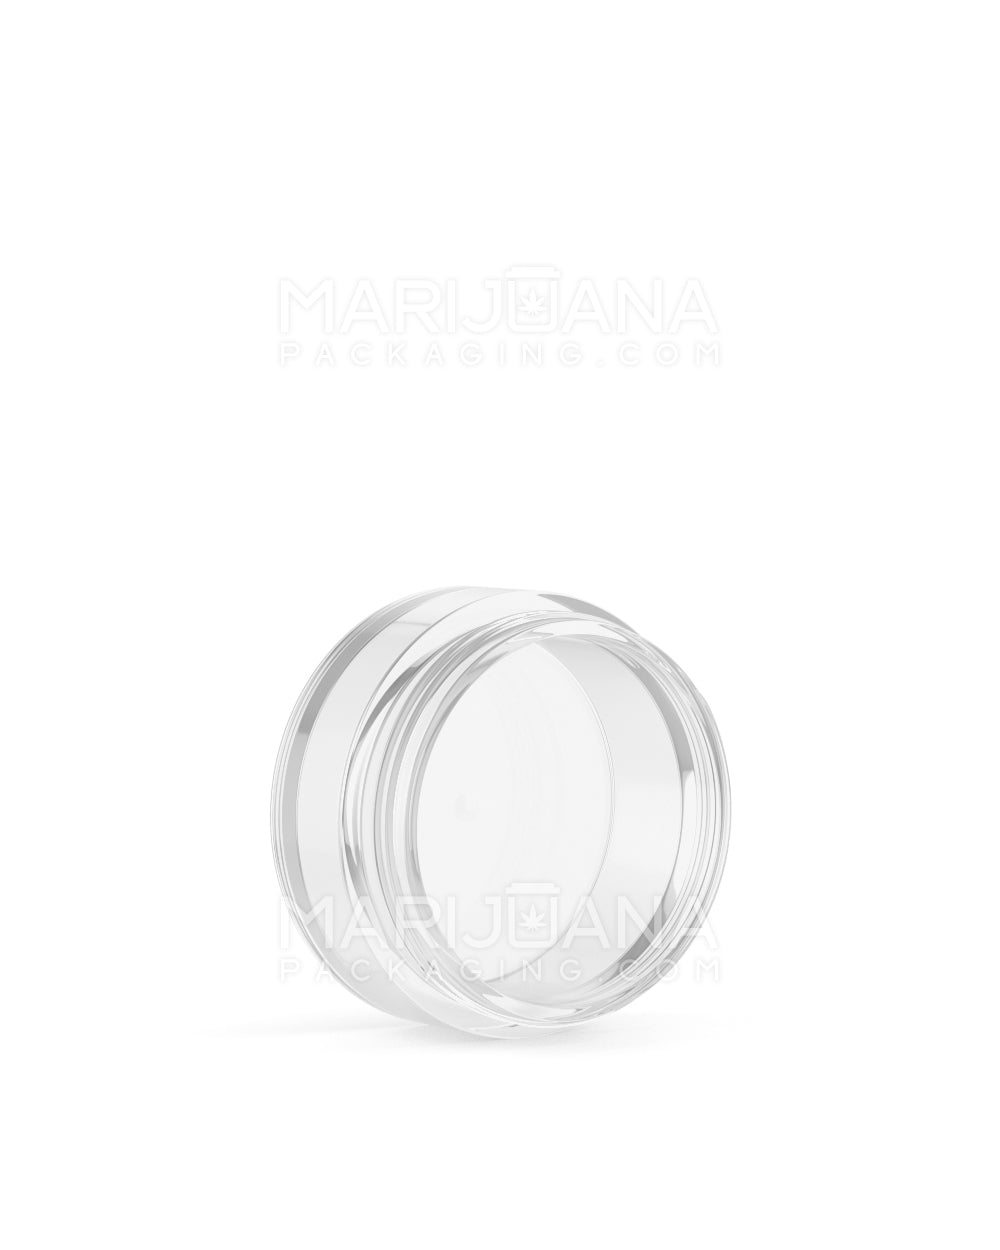 Clear Concentrate Containers w/ Screw Top Cap | 10mL - Plastic - 100 Count - 6